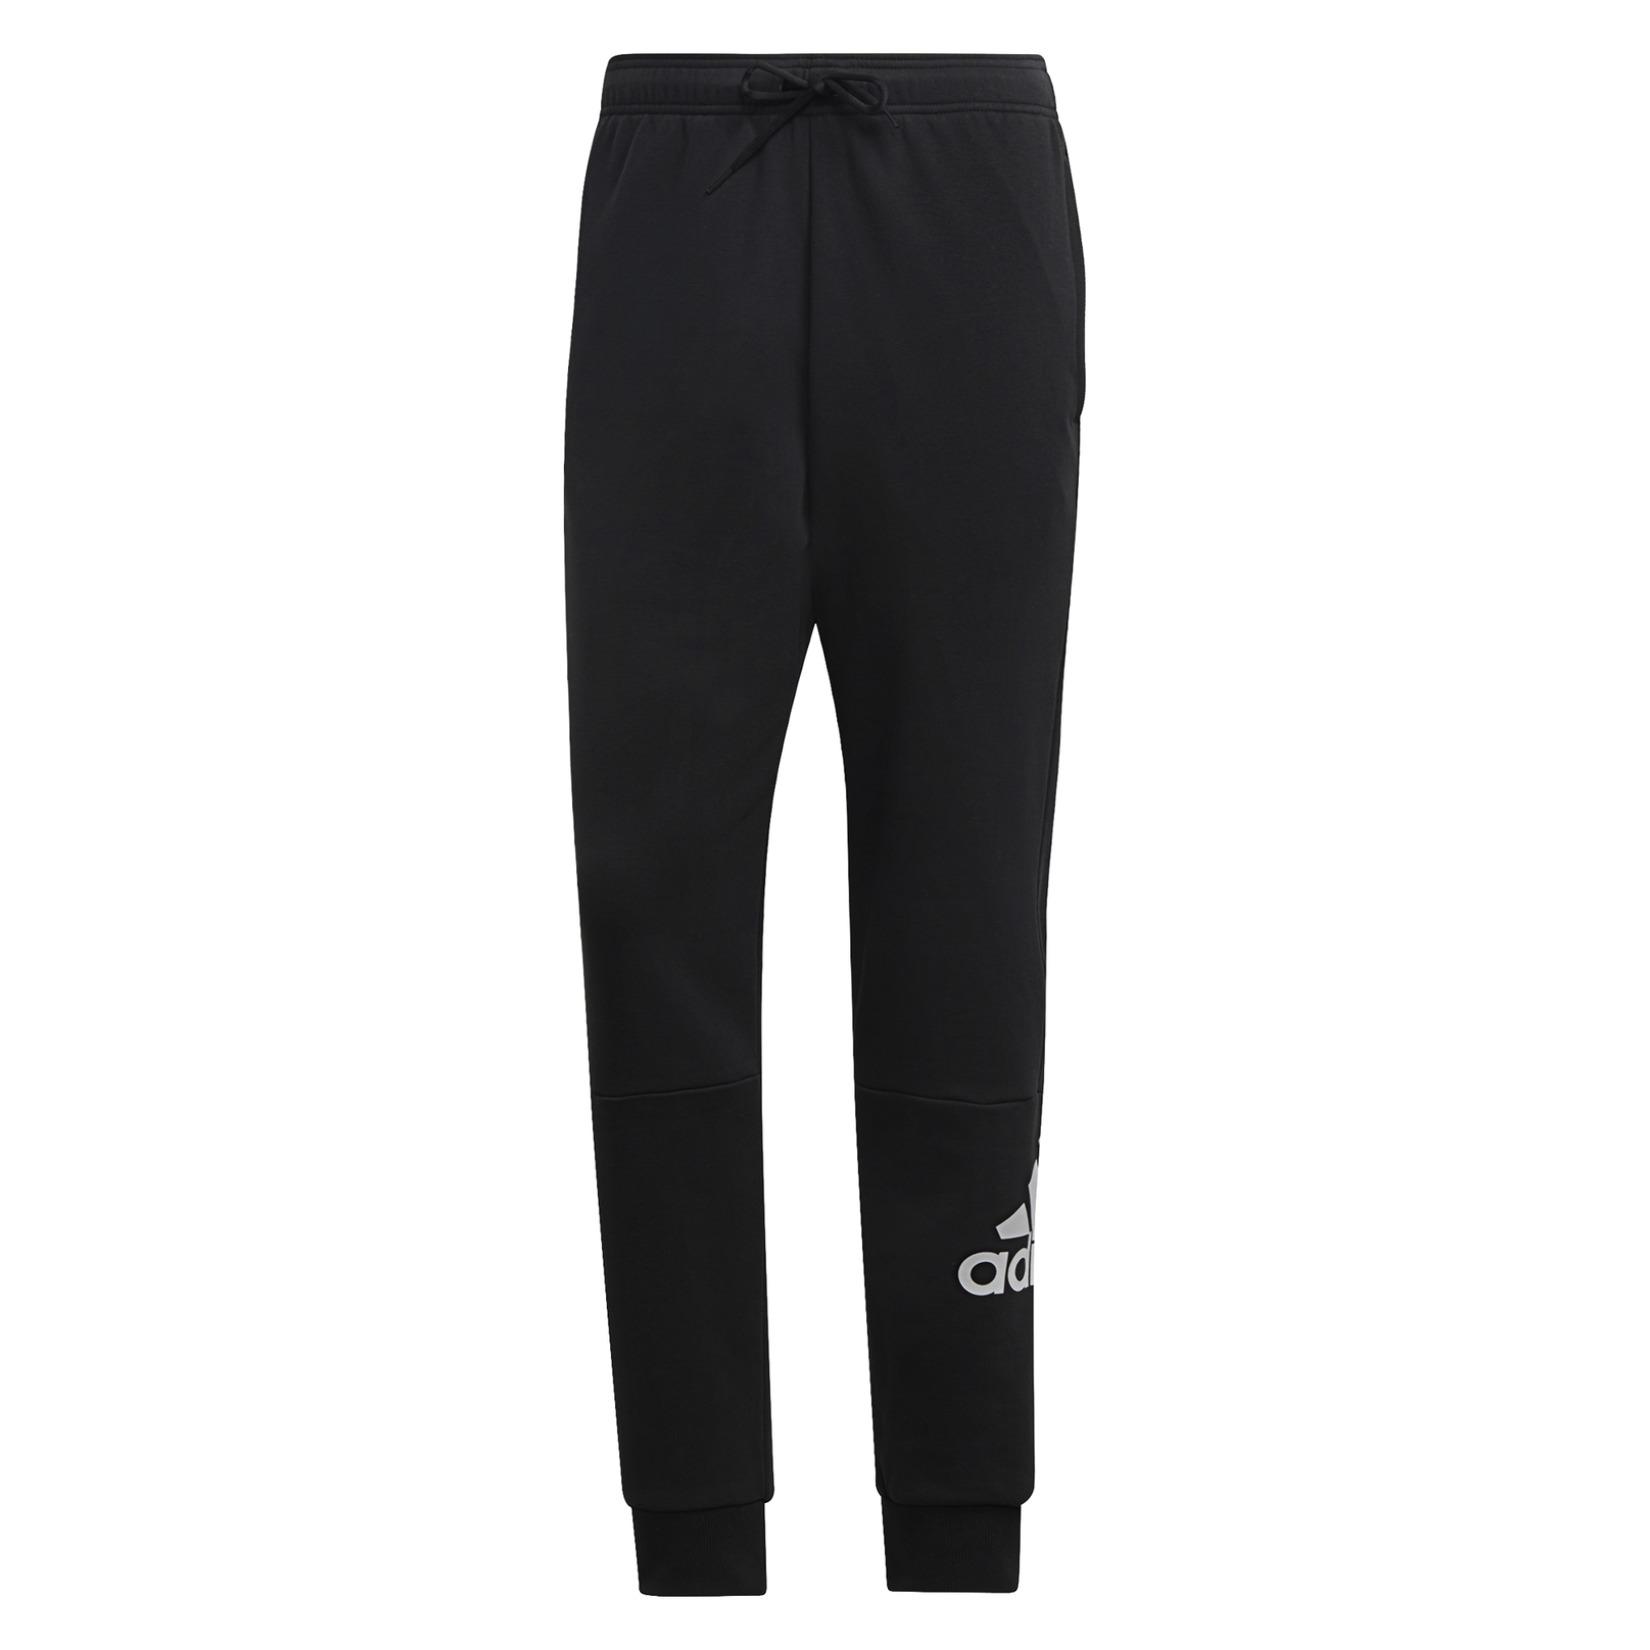 Adidas Must Haves French Terry Badge of Sport Pants Black-White